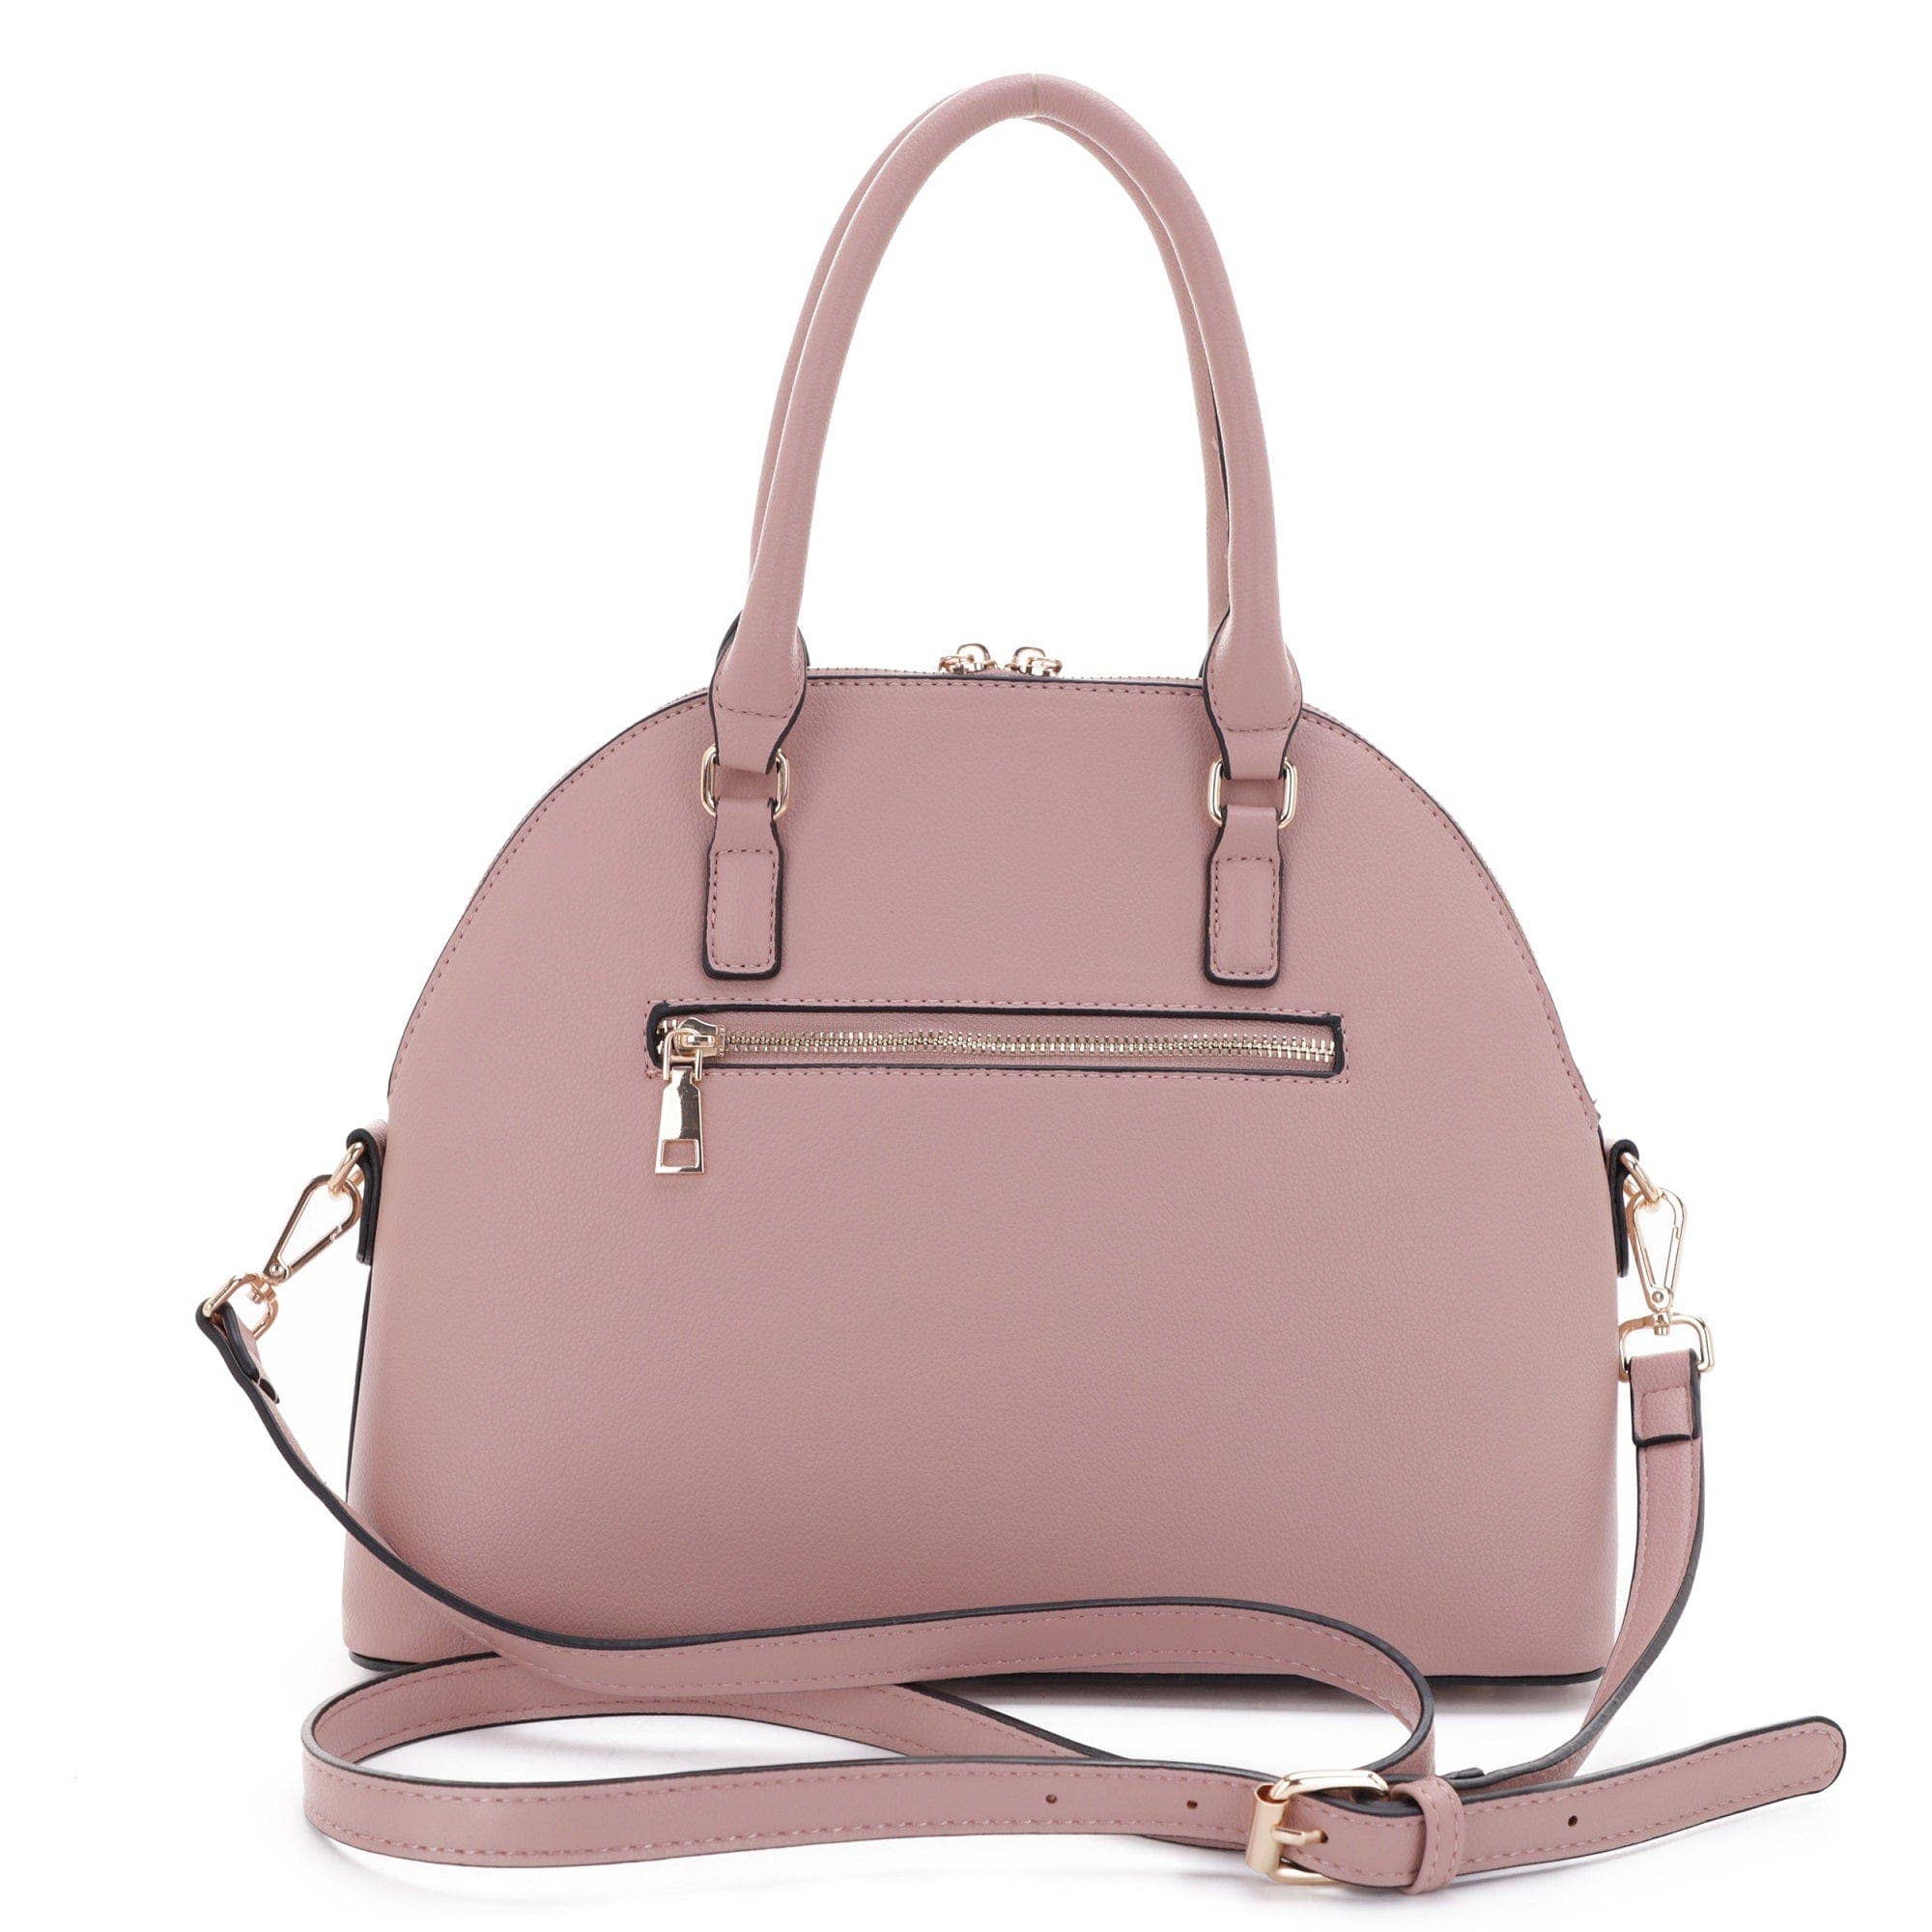 Natalie Bag in Taupe